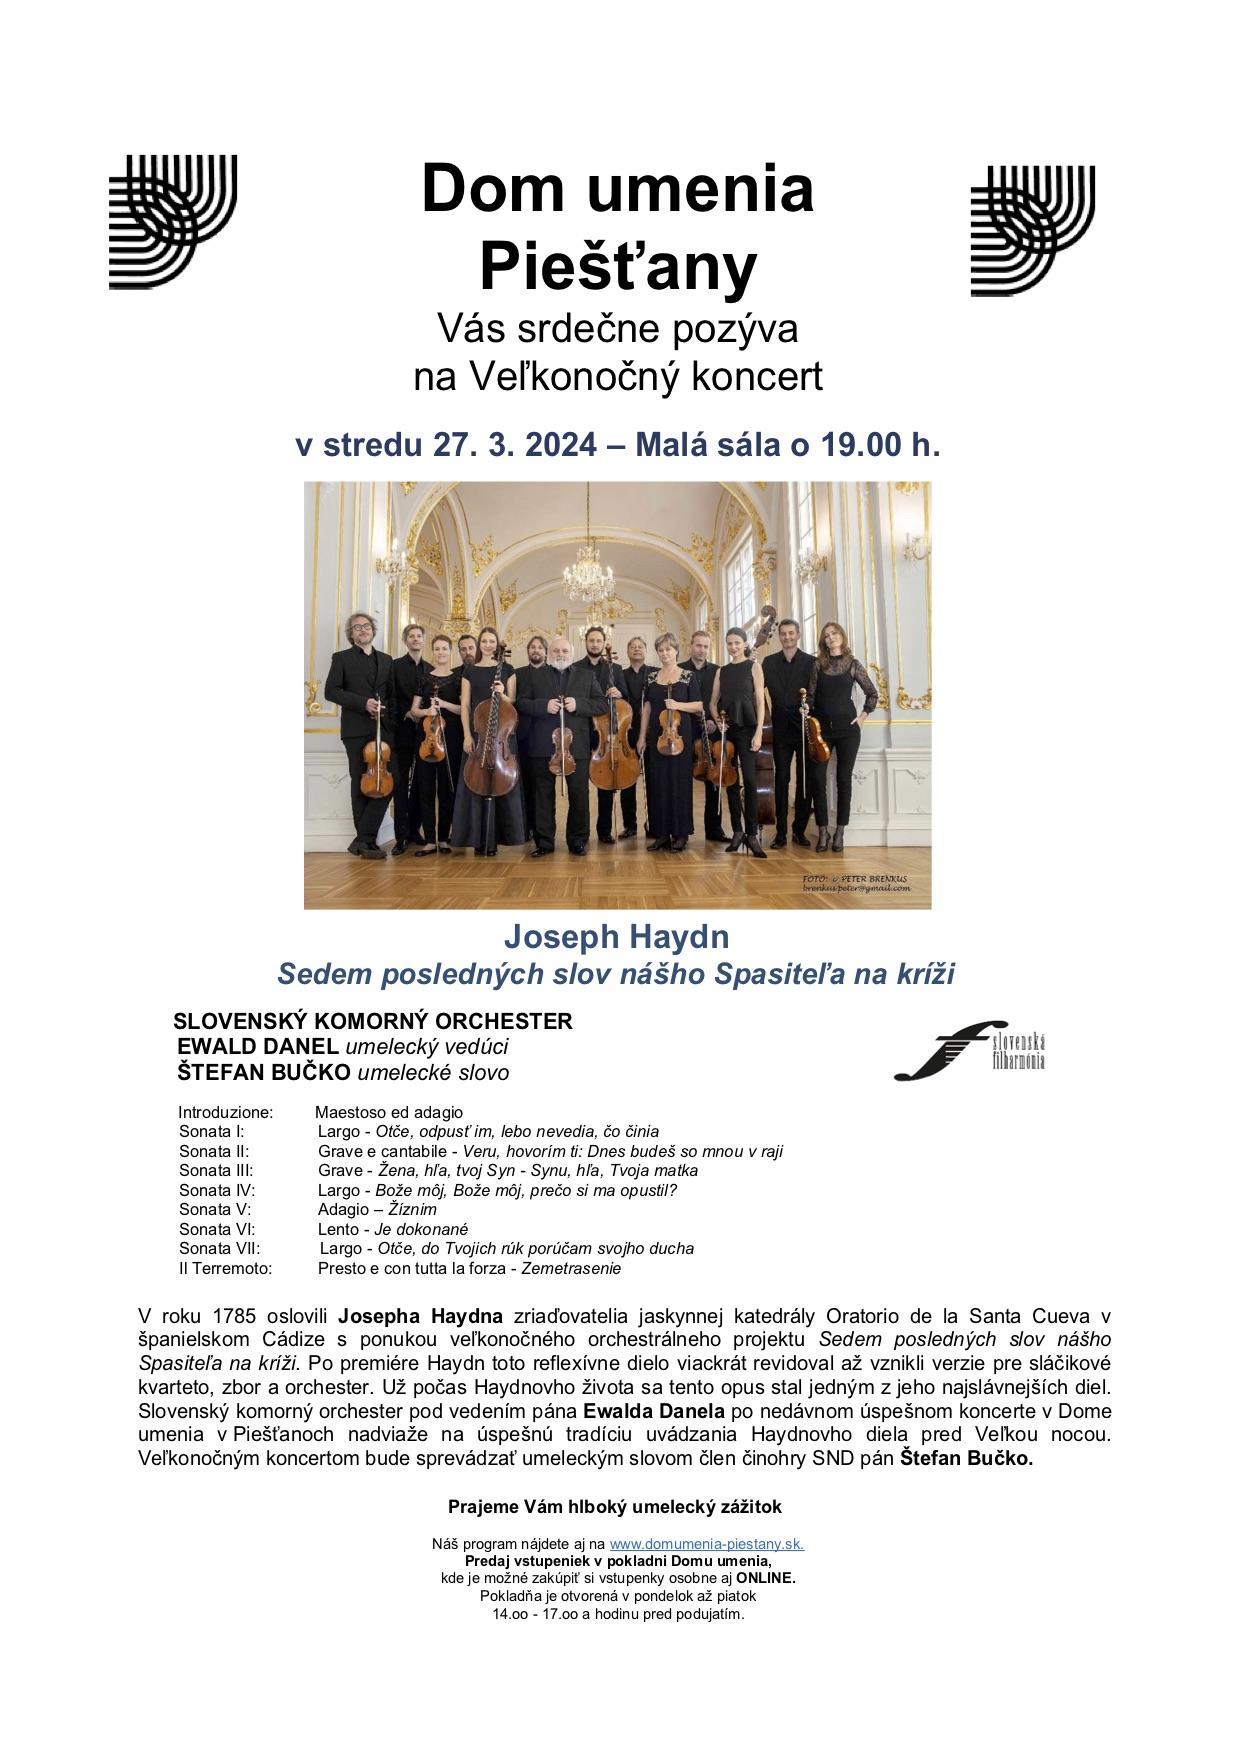 Piestany, komorny, orchester, plagat